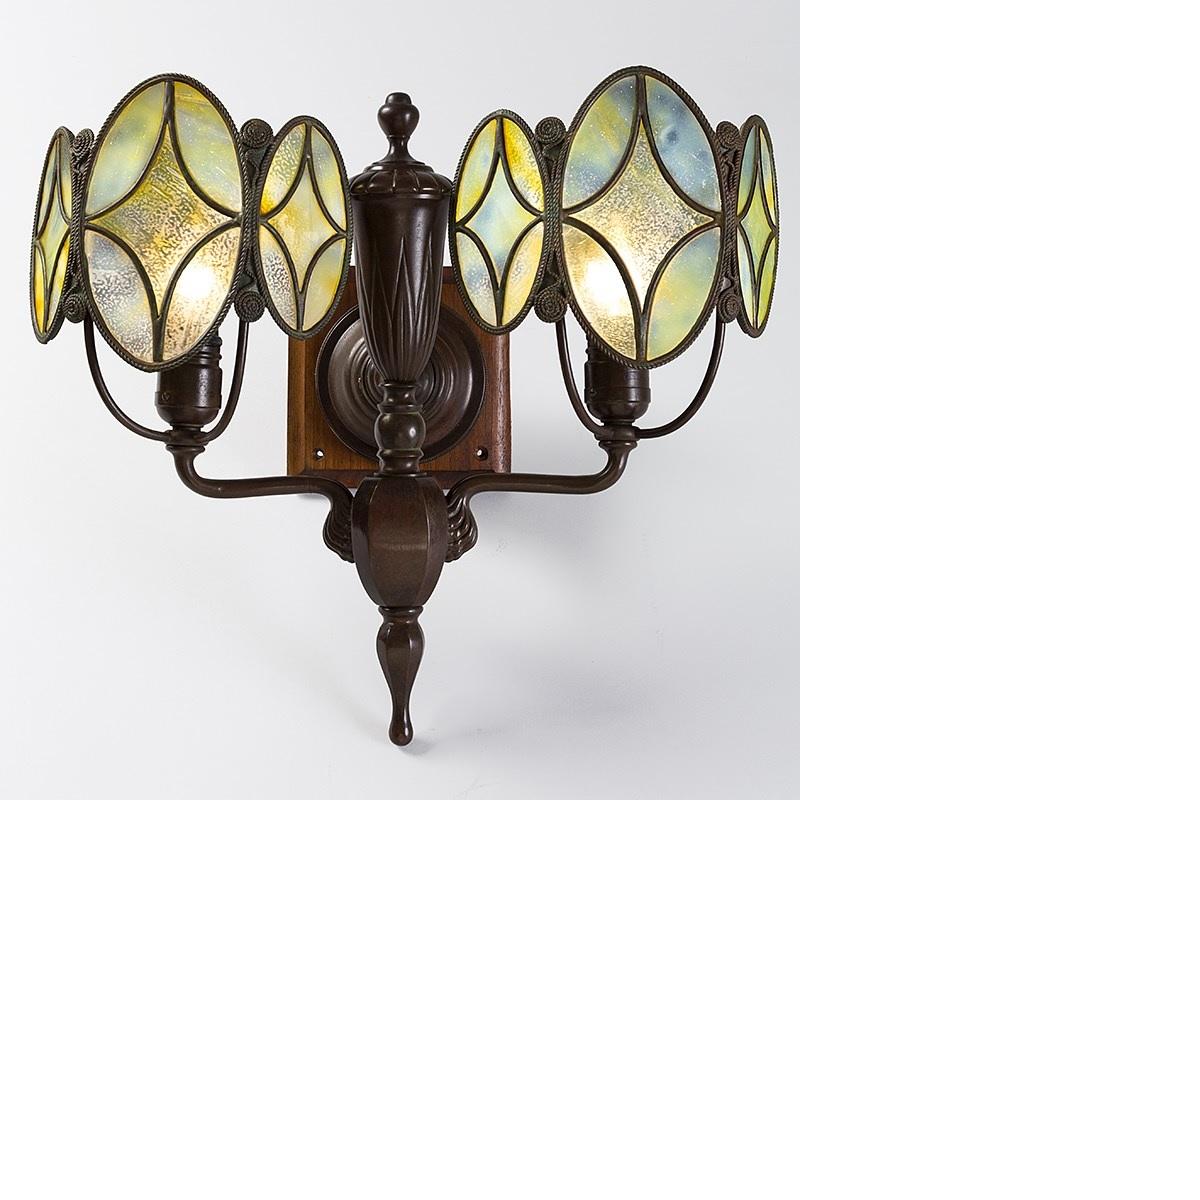 A pair of Tiffany Studios New York patinated bronze and Favrile glass two-armed sconces with opalescent multi-hued shields. Each shield is comprised of three leaded glass oval panels, which are each composed of five pieces of glass. The central